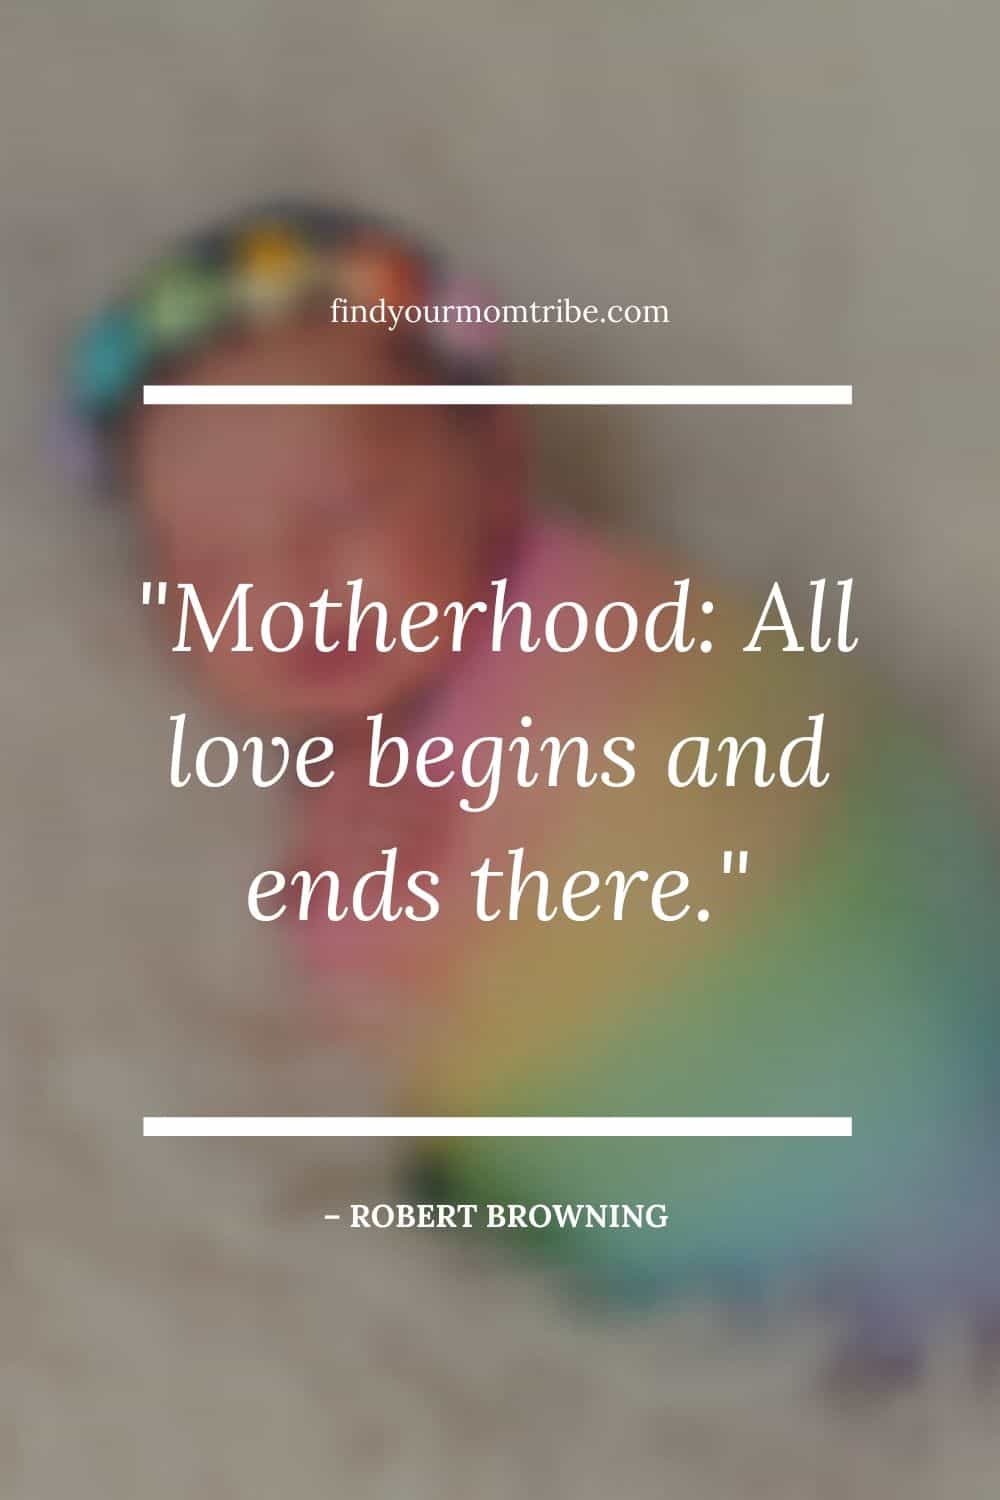 Rainbow Baby Quotes: 23 Ways To Express Newfound Hope